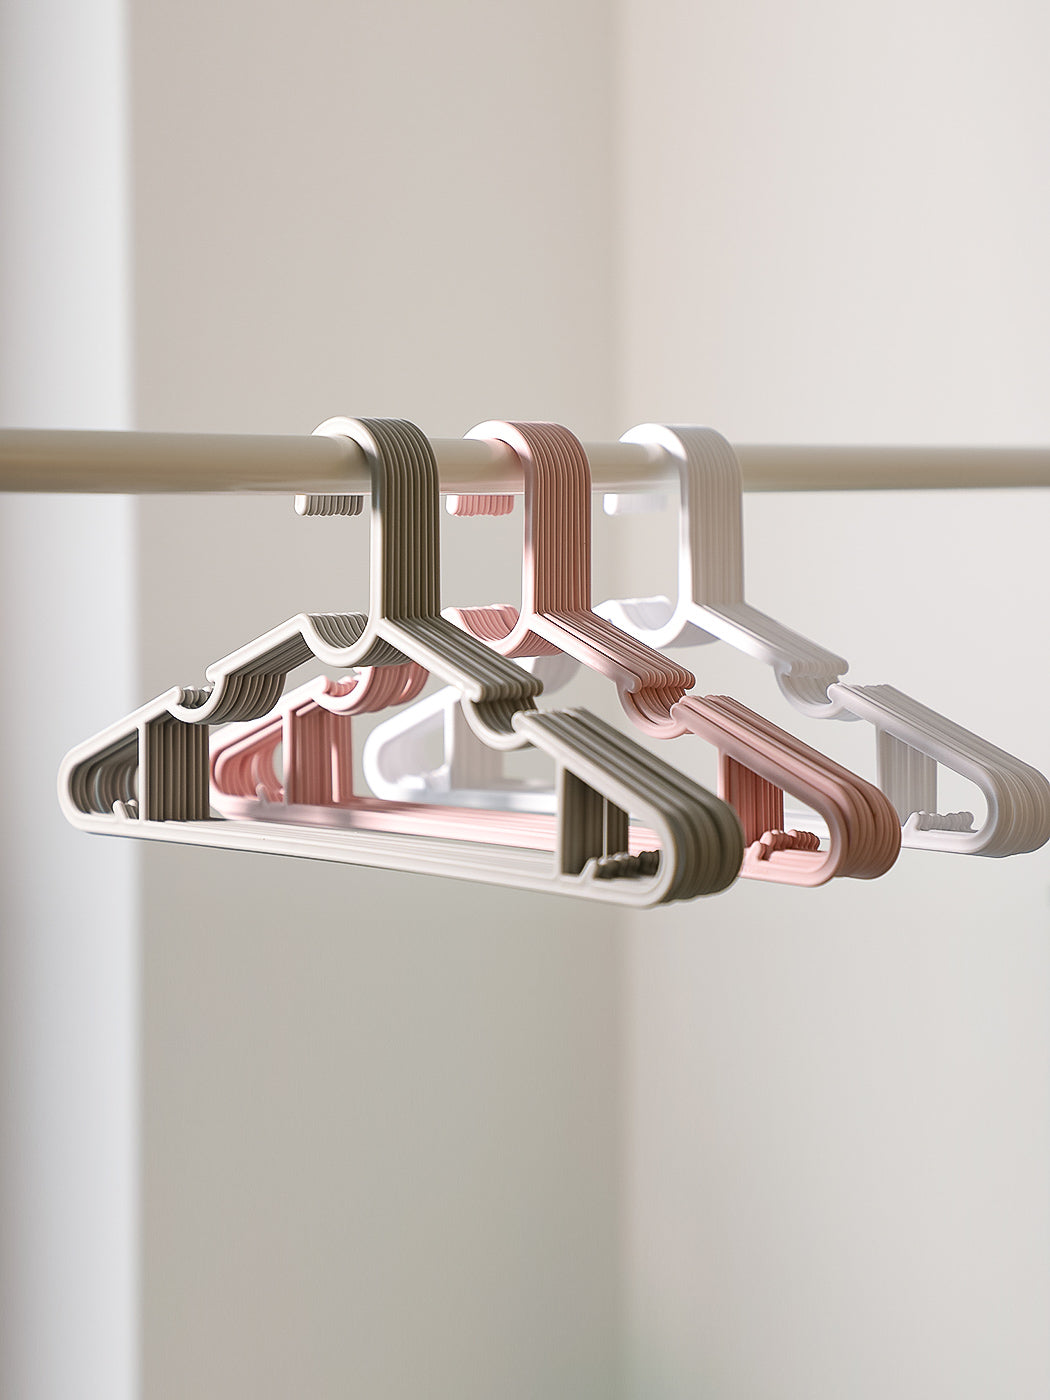 MINISO SIMPLE CLOTH HANGER 10 COUNTS ( GREY ) 2008111411102 CLOTHES HANGERS